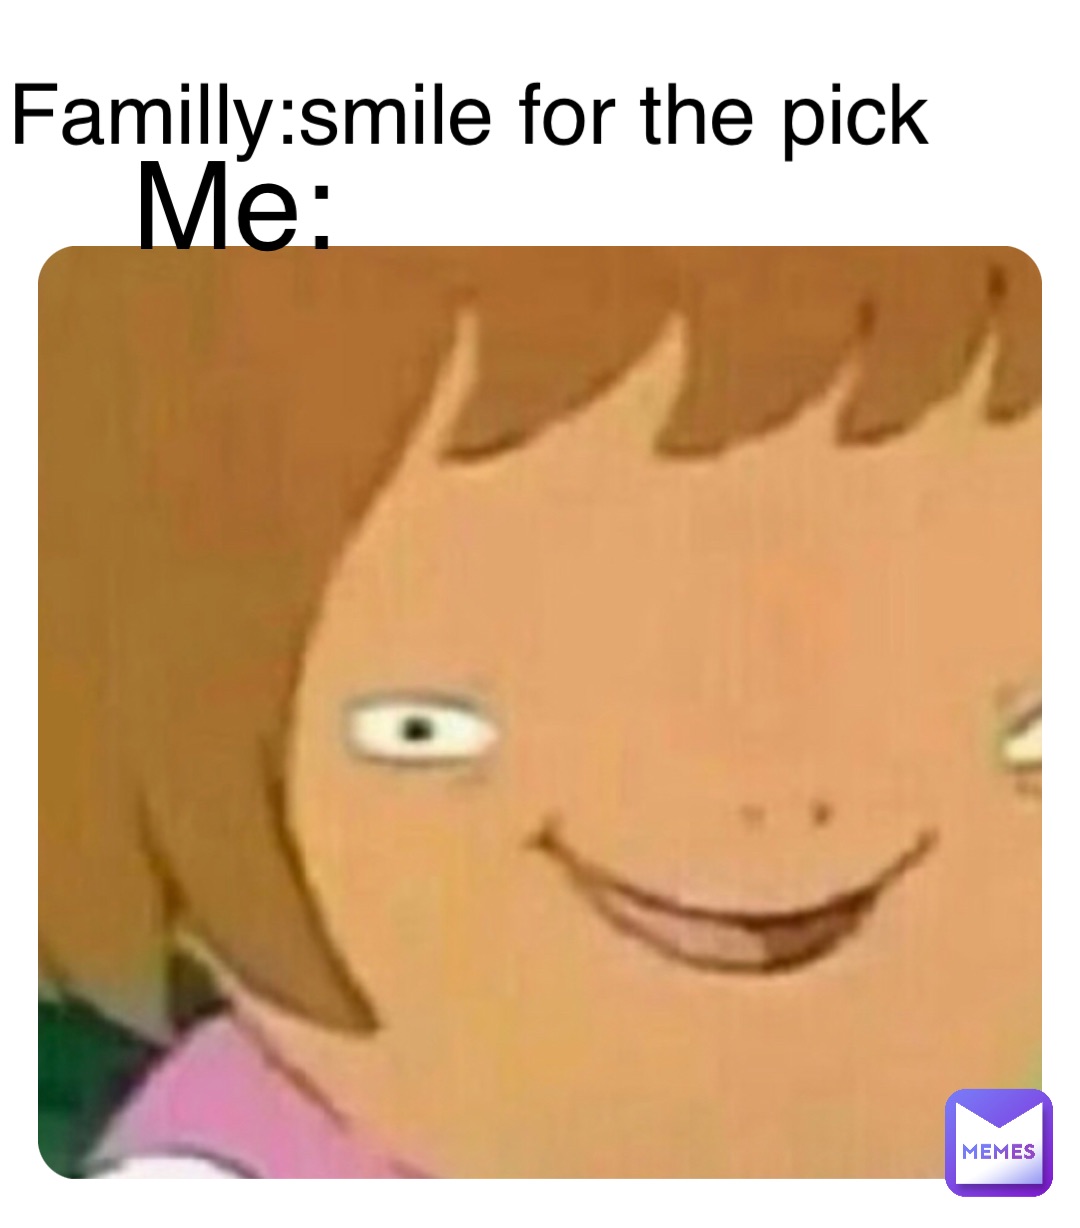 Double tap to edit Familly:smile for the pick Me: | @ | Memes